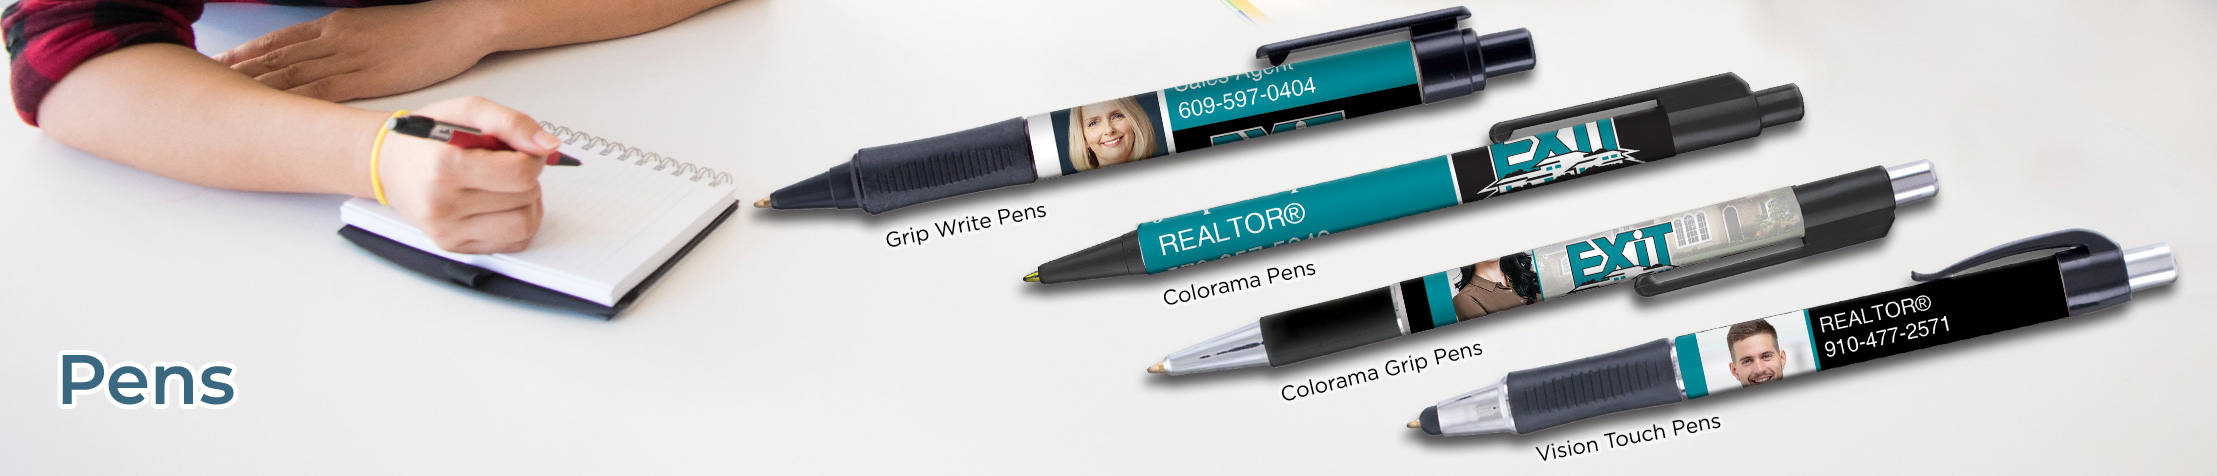 Exit Realty Real Estate Personalized Pens - promotional products: Grip Write Pens, Colorama Pens, Vision Touch Pens, and Colorama Grip Pens | BestPrintBuy.com